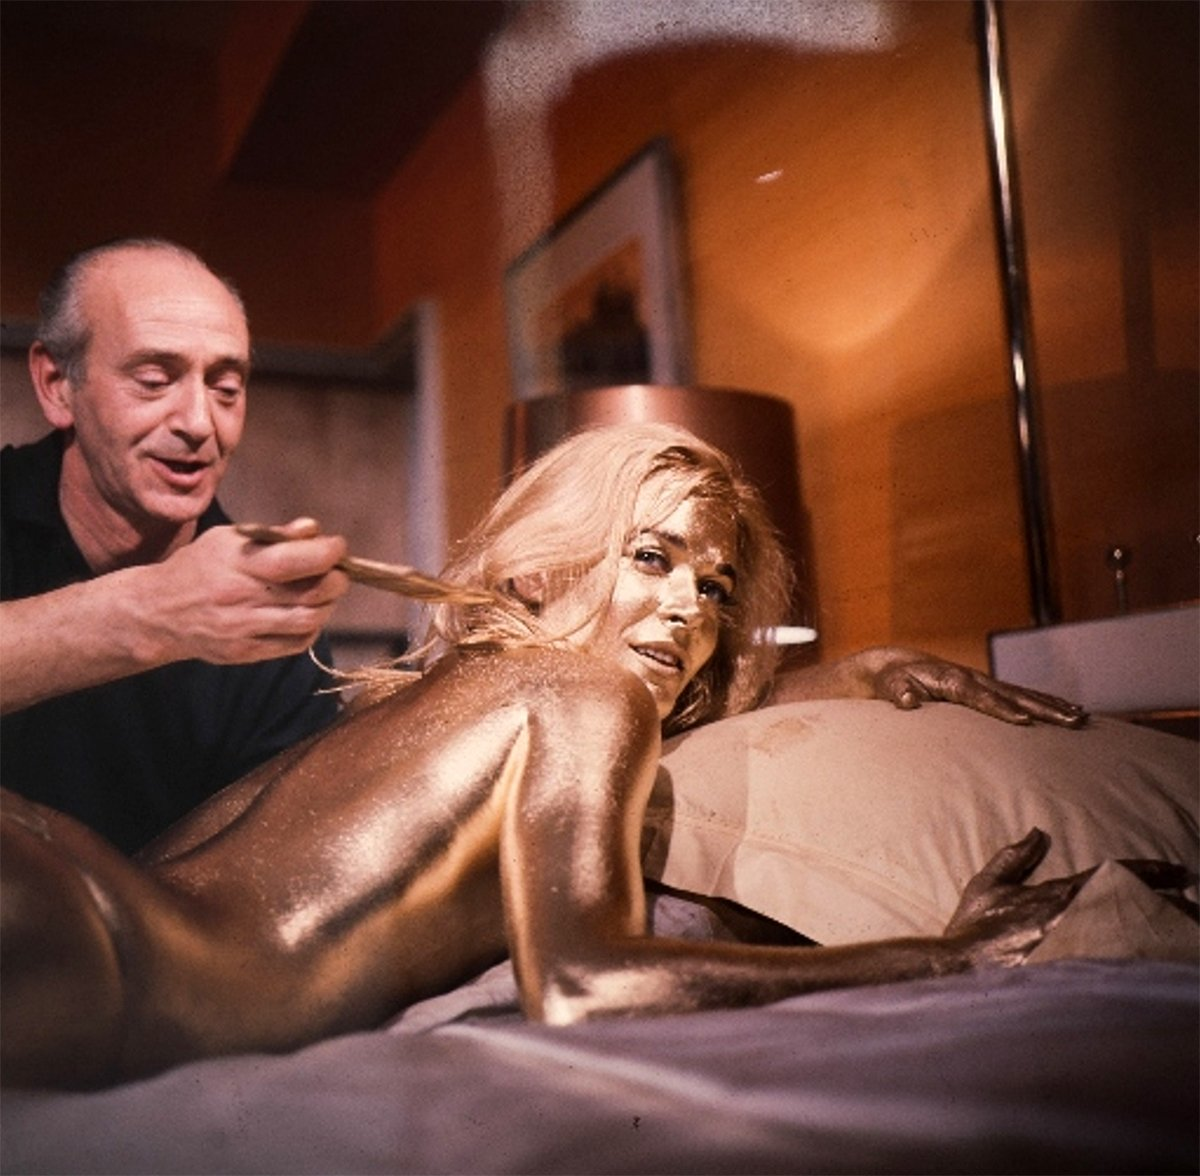 Behind the scenes pic from James Bond Goldfinger in which gold is being applied to the woman on the bed.